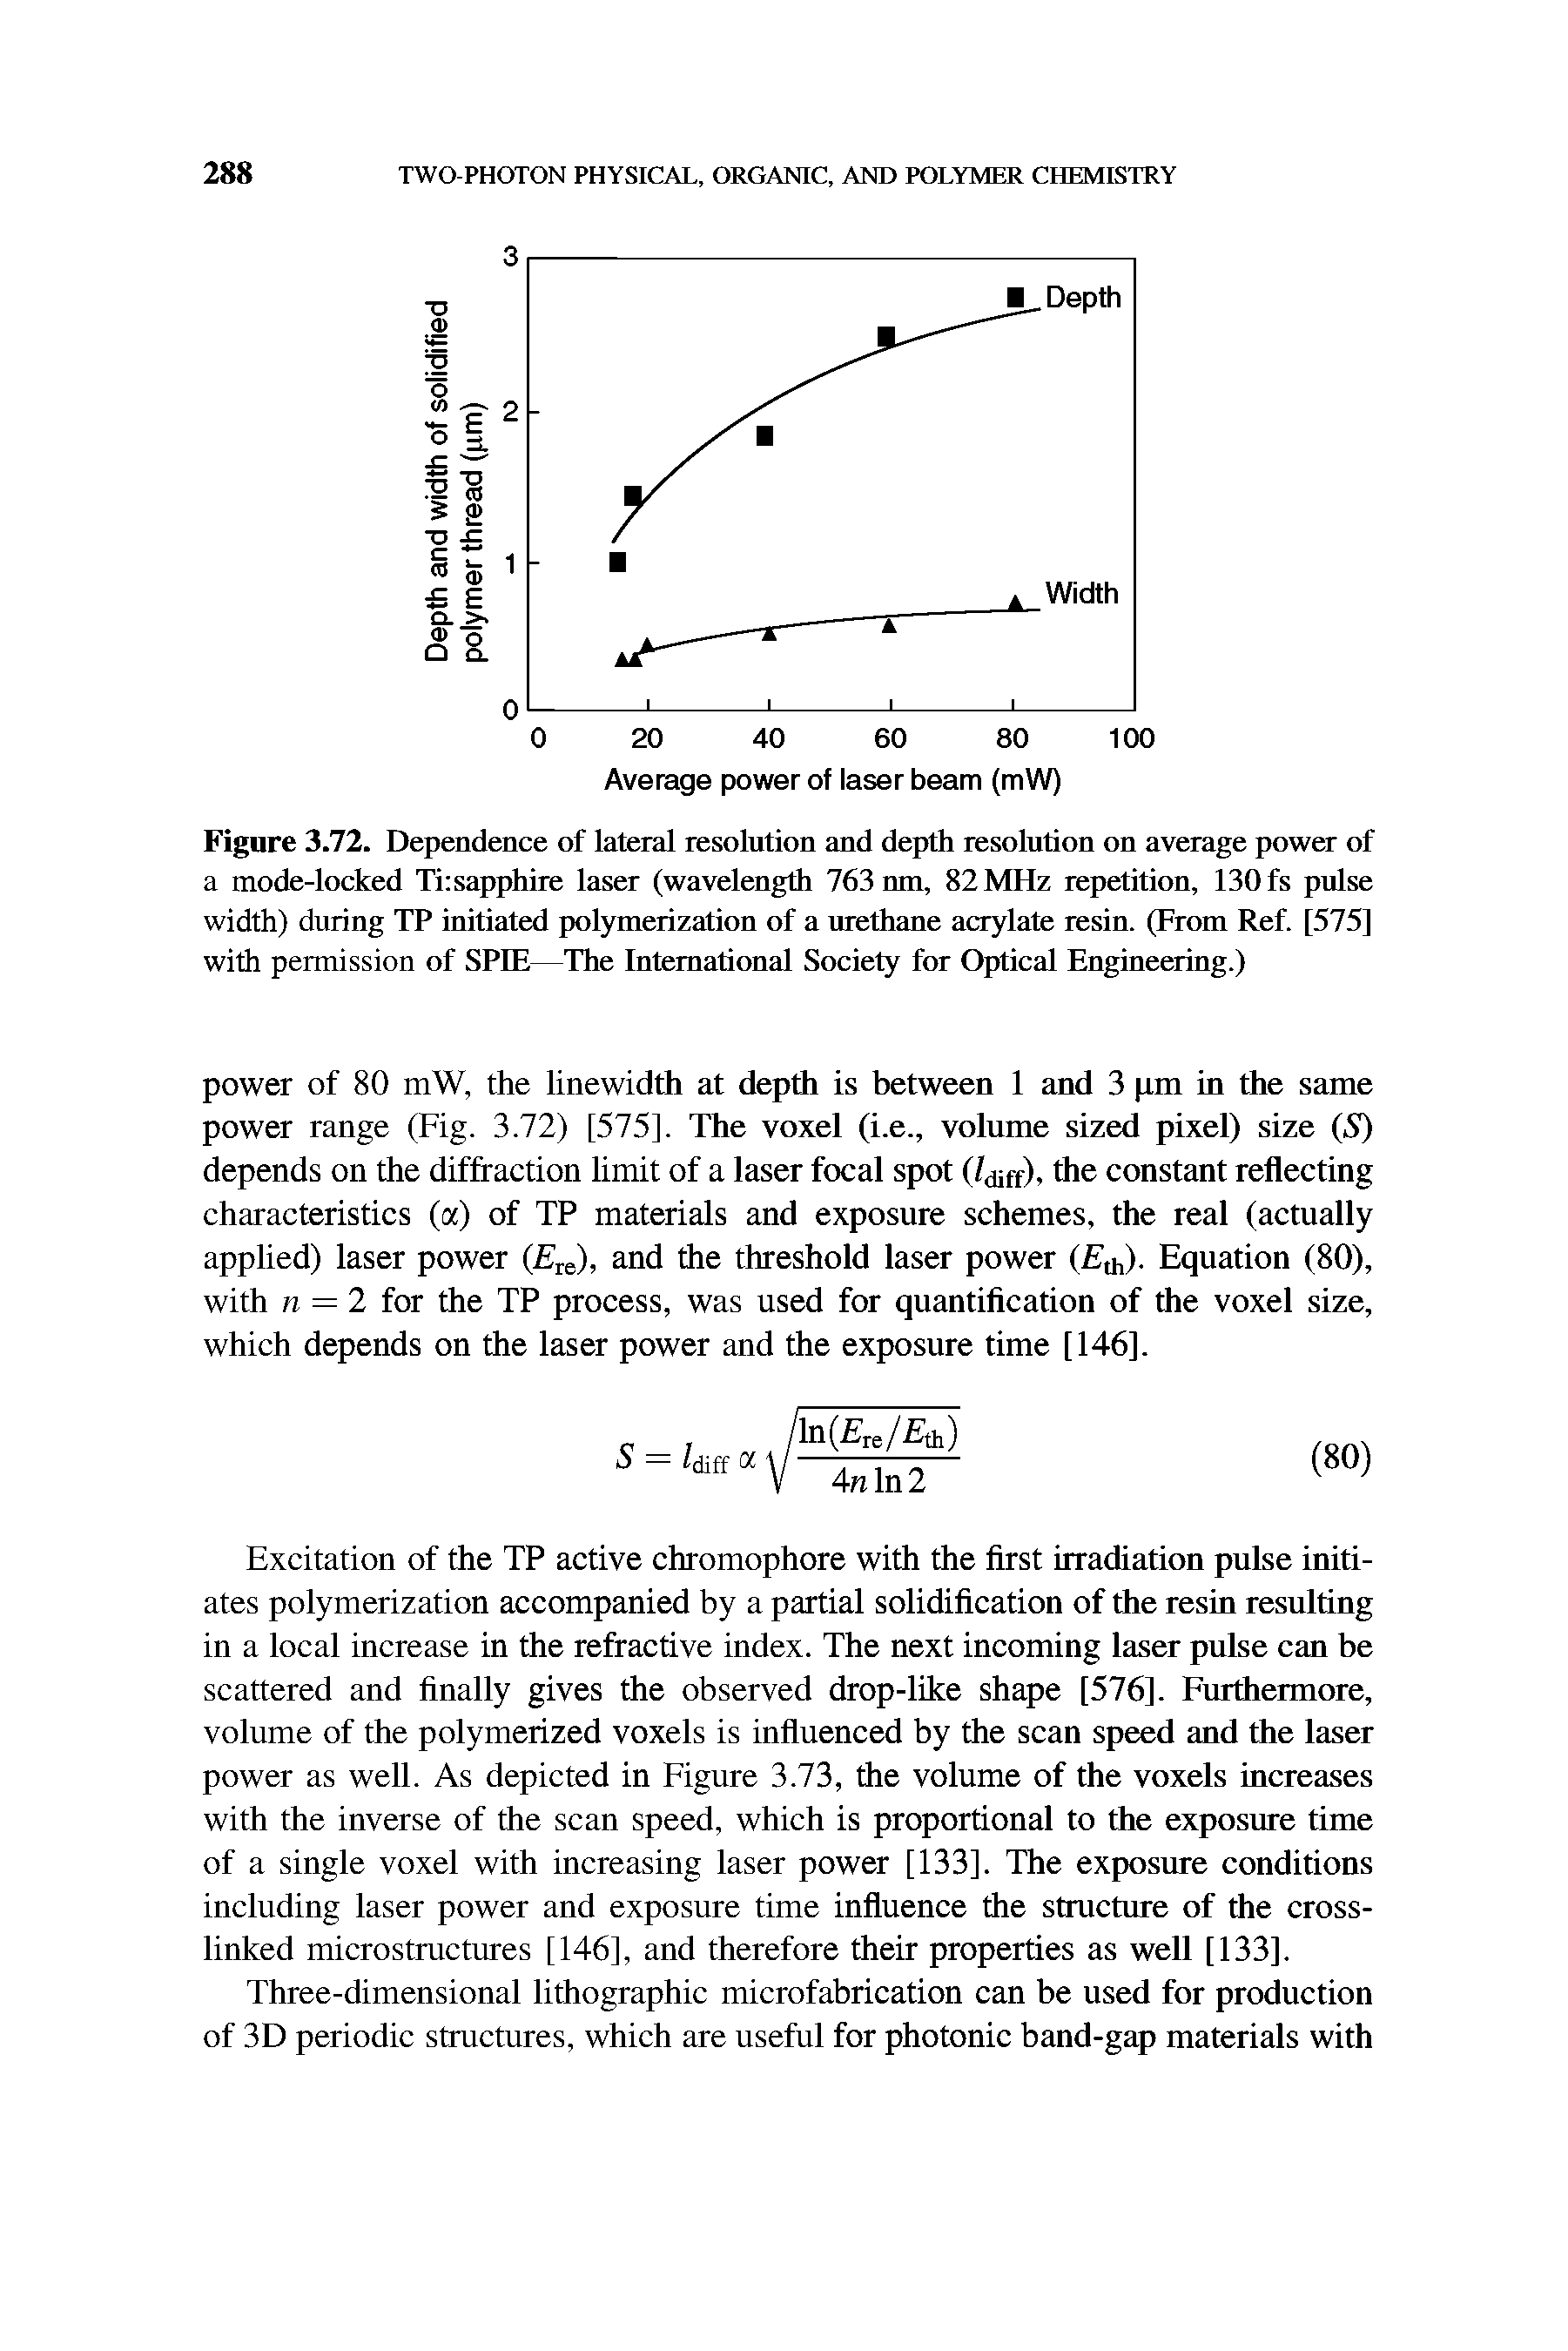 Figure 3.72. Dependence of lateral resolution and depth resolution on average power of a mode-locked Ti sapphire laser (wavelength 763 nm, 82MHz repetition, 130 fs pulse width) during TP initiated polymerization of a urethane acrylate resin. (From Ref. [575] with permission of SPIE—The International Society for Optical Engineering.)...